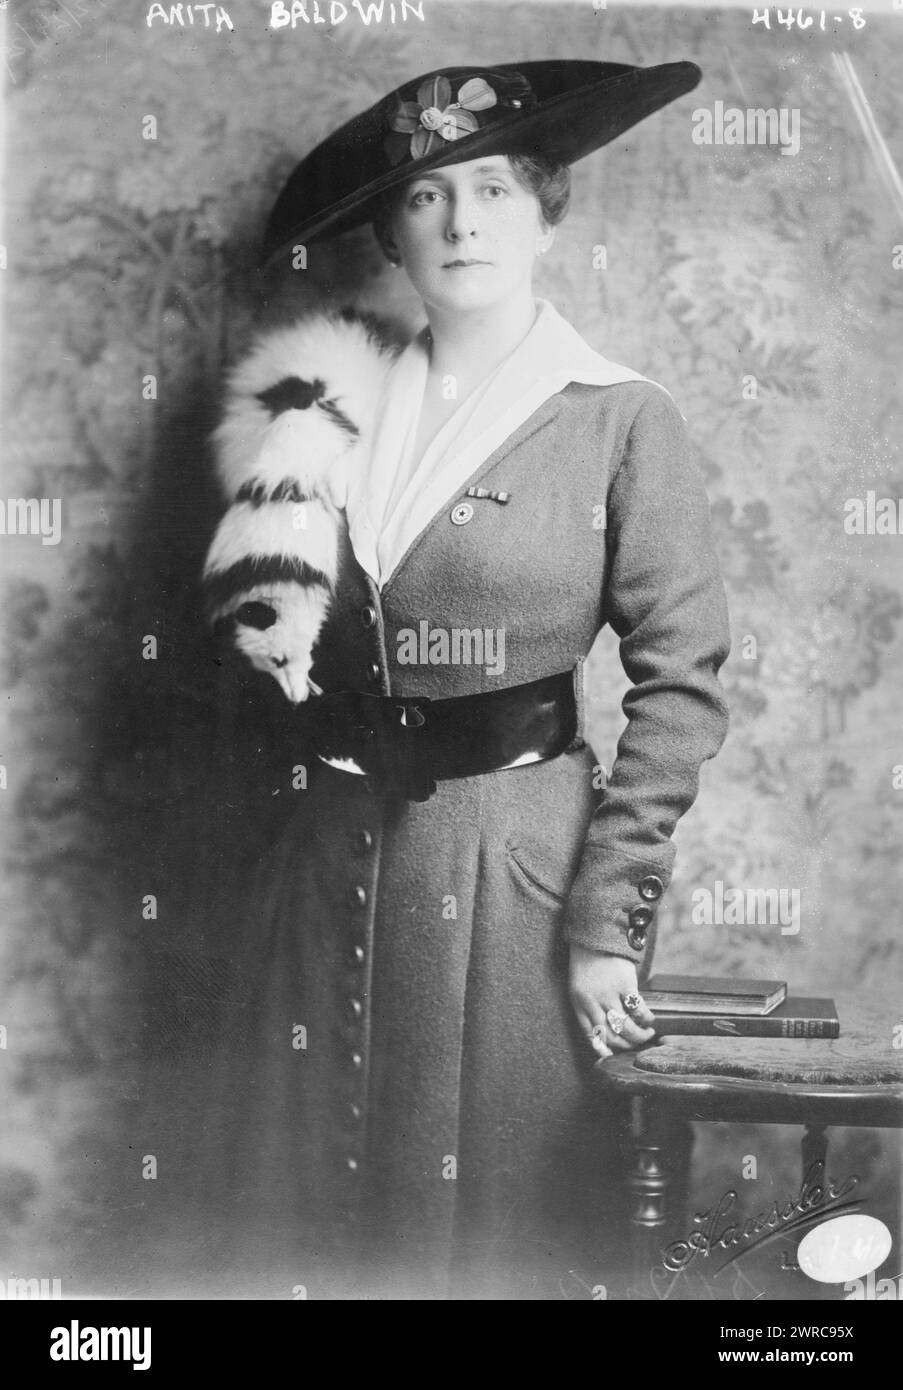 Anita Baldwin, Photograph shows composer Anita Baldwin McClaughry (1876-1939), daughter of real estate millionaire Elias Jackson 'Lucky' Baldwin, wearing a hat and fur tippet with animal head., 1929 Dec. 24, Glass negatives, 1 negative: glass Stock Photo